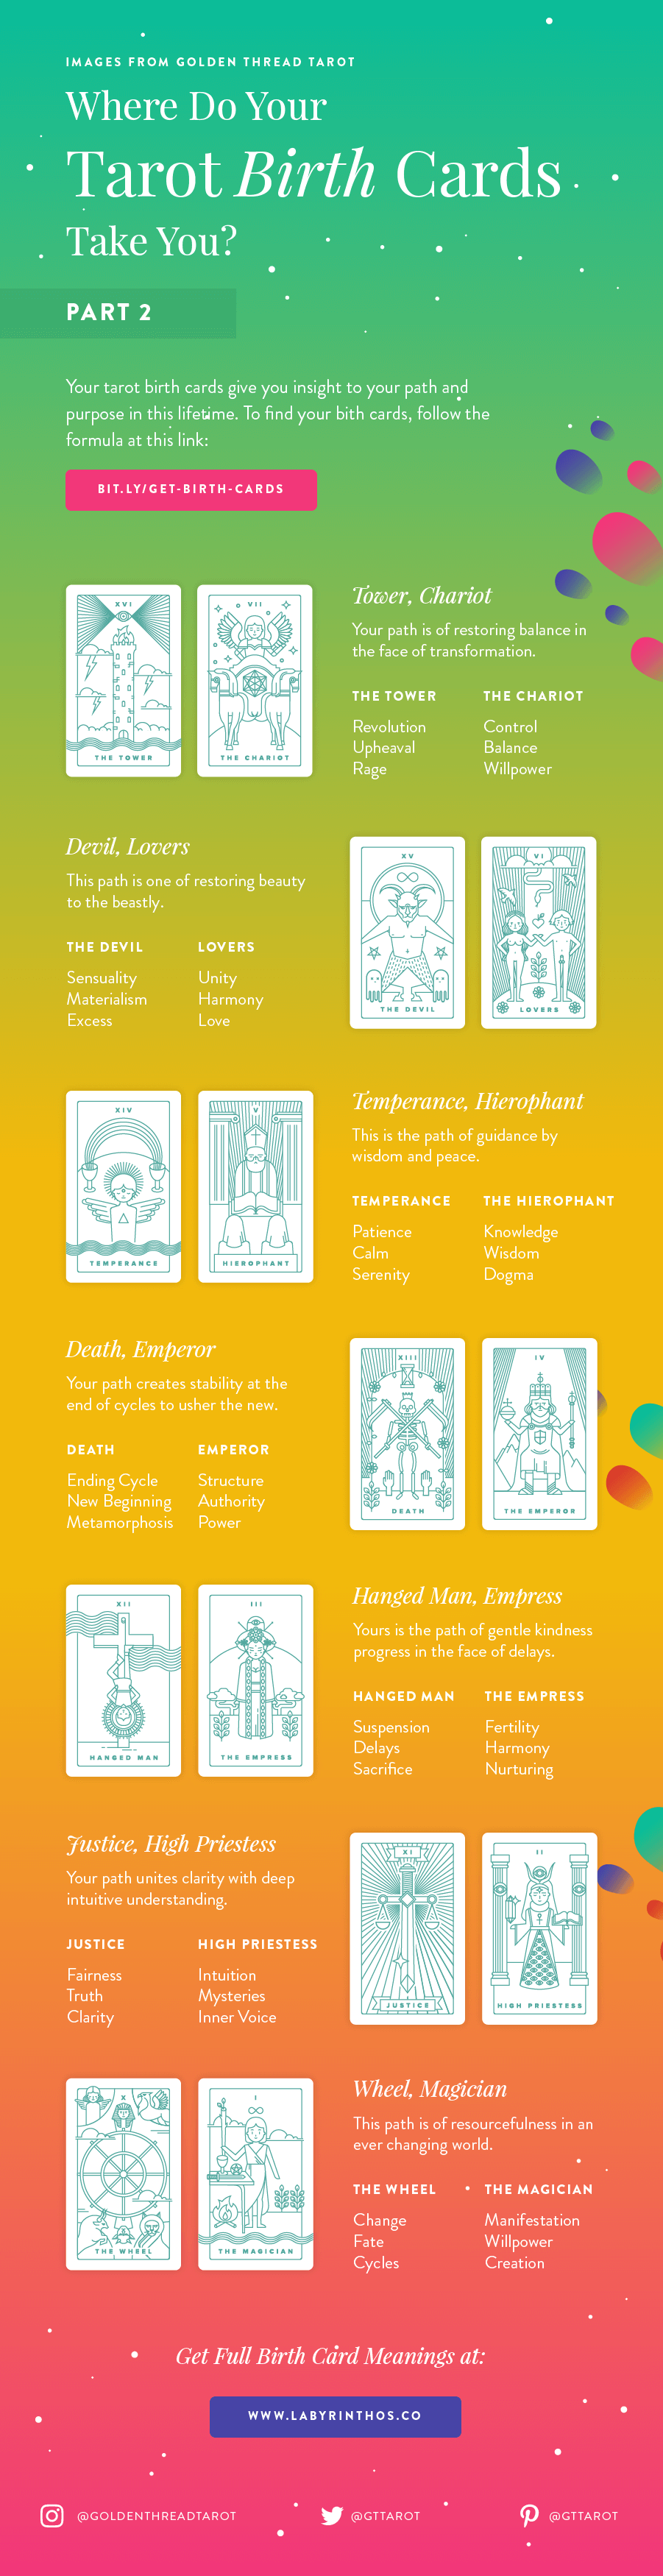 Tarot Birth Card Meanings Infographic - Part 2